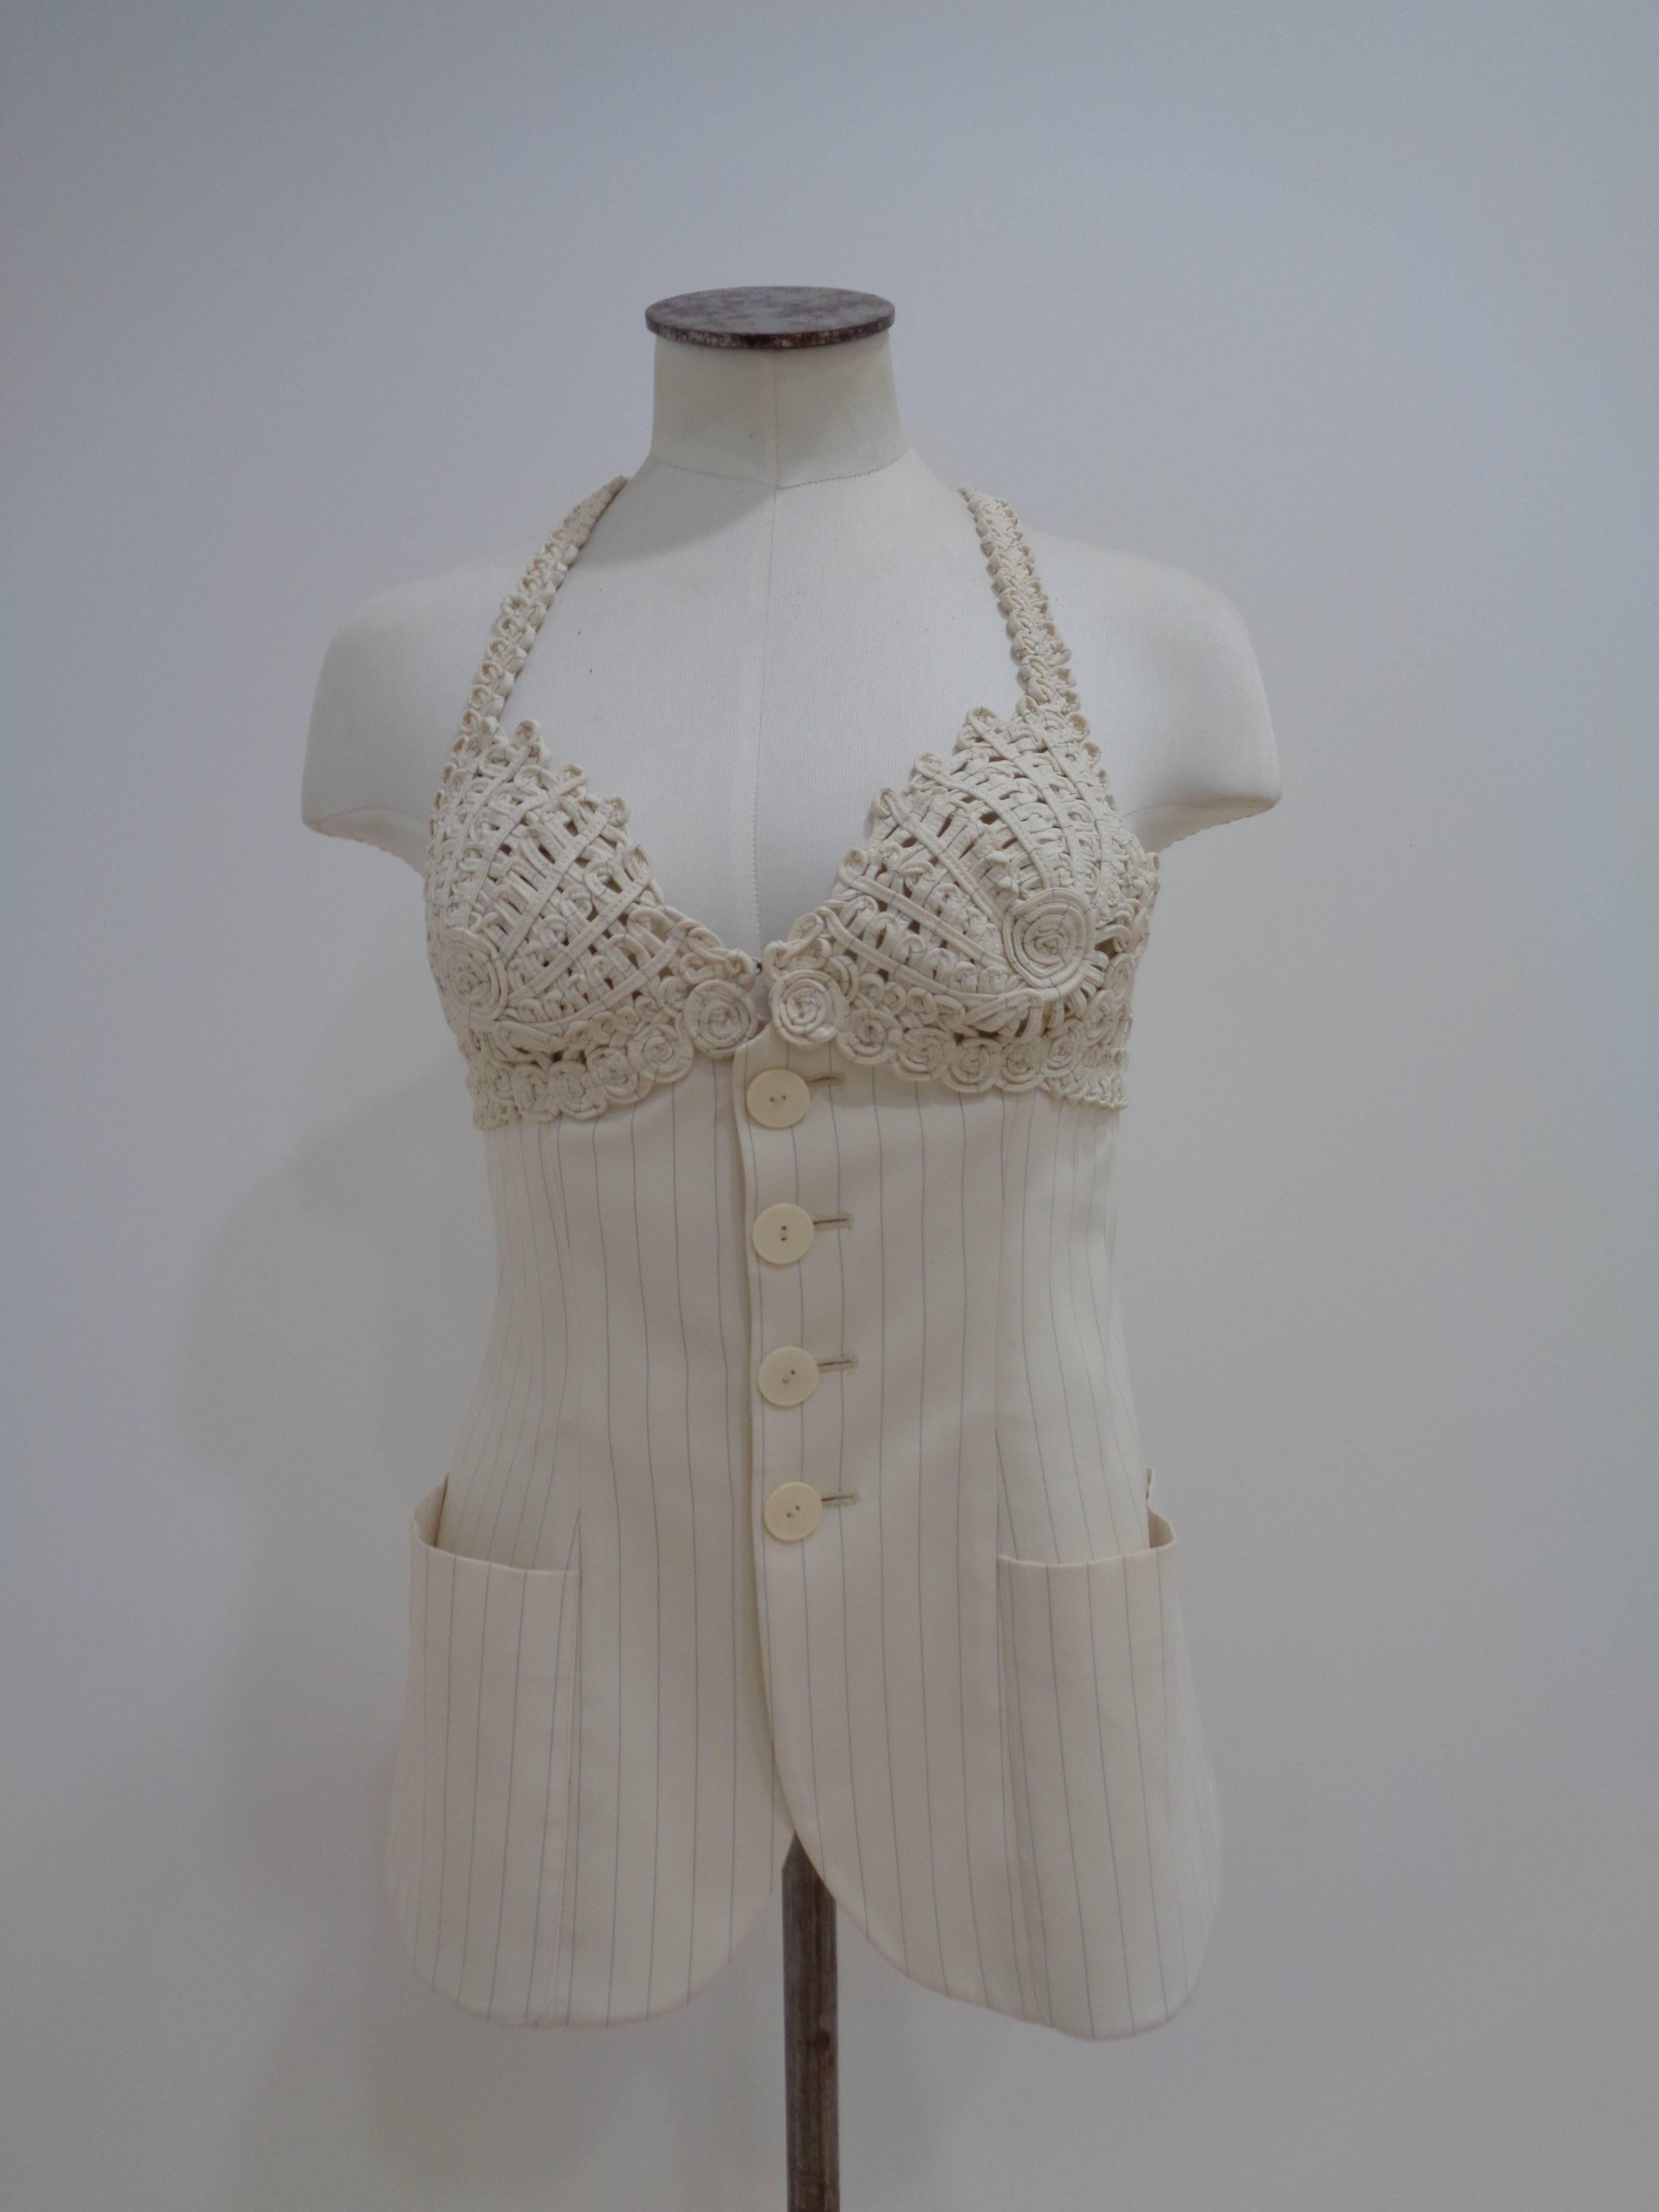 Jean Paul Gautier Femme Cream Corset

Totally made in italy in size M